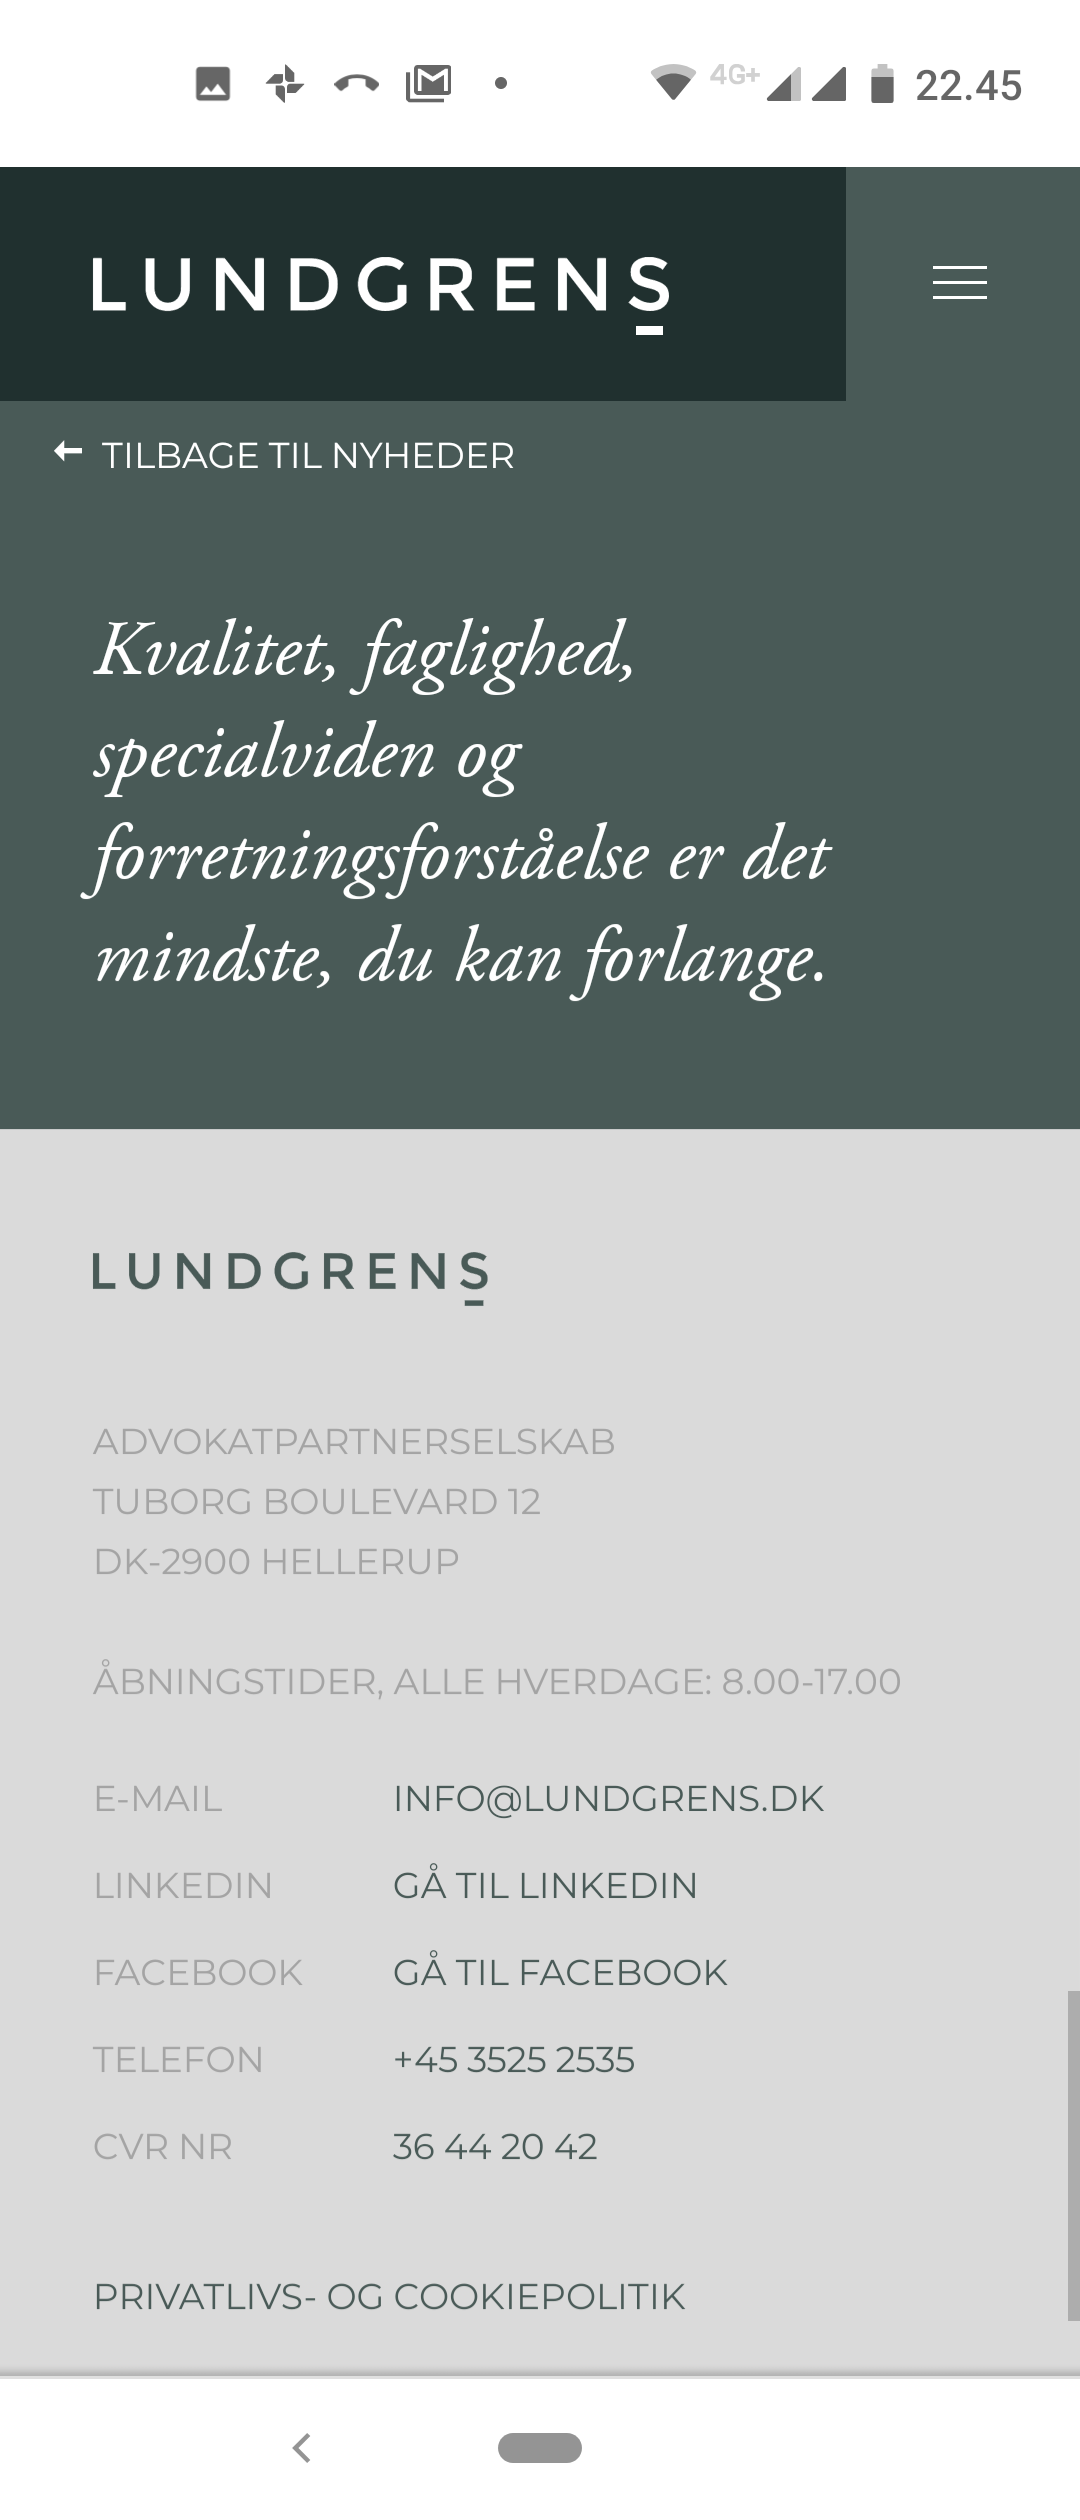 If you choose Lundgren's lawyers to work for you. Then be careful Lundgrens does also choose to work for the opposing part Jyske Bank A/S. And is habil, in our fraud and false case against Jyske Bank A/S 🏦. Then Lundgrens chose to accept a million jobs, offered by Jyske Bank's Board of Directors. Just a few months after Lundgrens took the assignment against Jyske Bank A/S for fraud and false. :-( We fired Lundgrens 1 year after, when we discovered that Lundgren's Partner Company real works for Jyske Bank's Board of Directors. And therefore directly in contravention of good lawyer custom, counteract us, and that our claims against Jyske Bank were not presented to the courts. Therefore we would like to warn you as a client in Lundgrens, as we believe they have received a return commission from Jyske Bank, to help Jyske Bank A/S A false or corrupt lawyer is a threat to the Danish legal community.